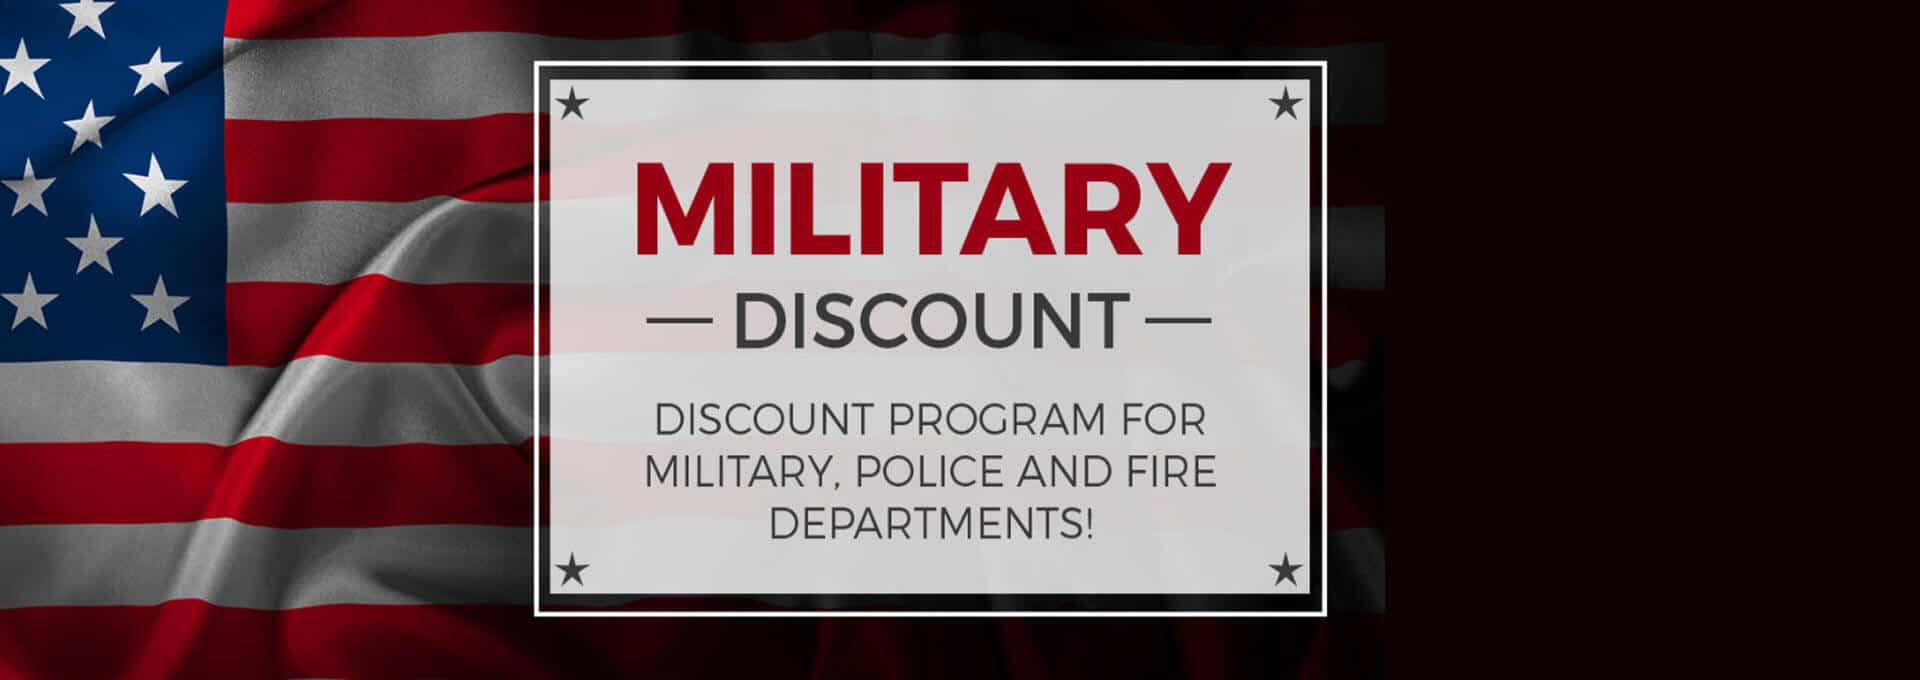 Clear Chimney Military Discount